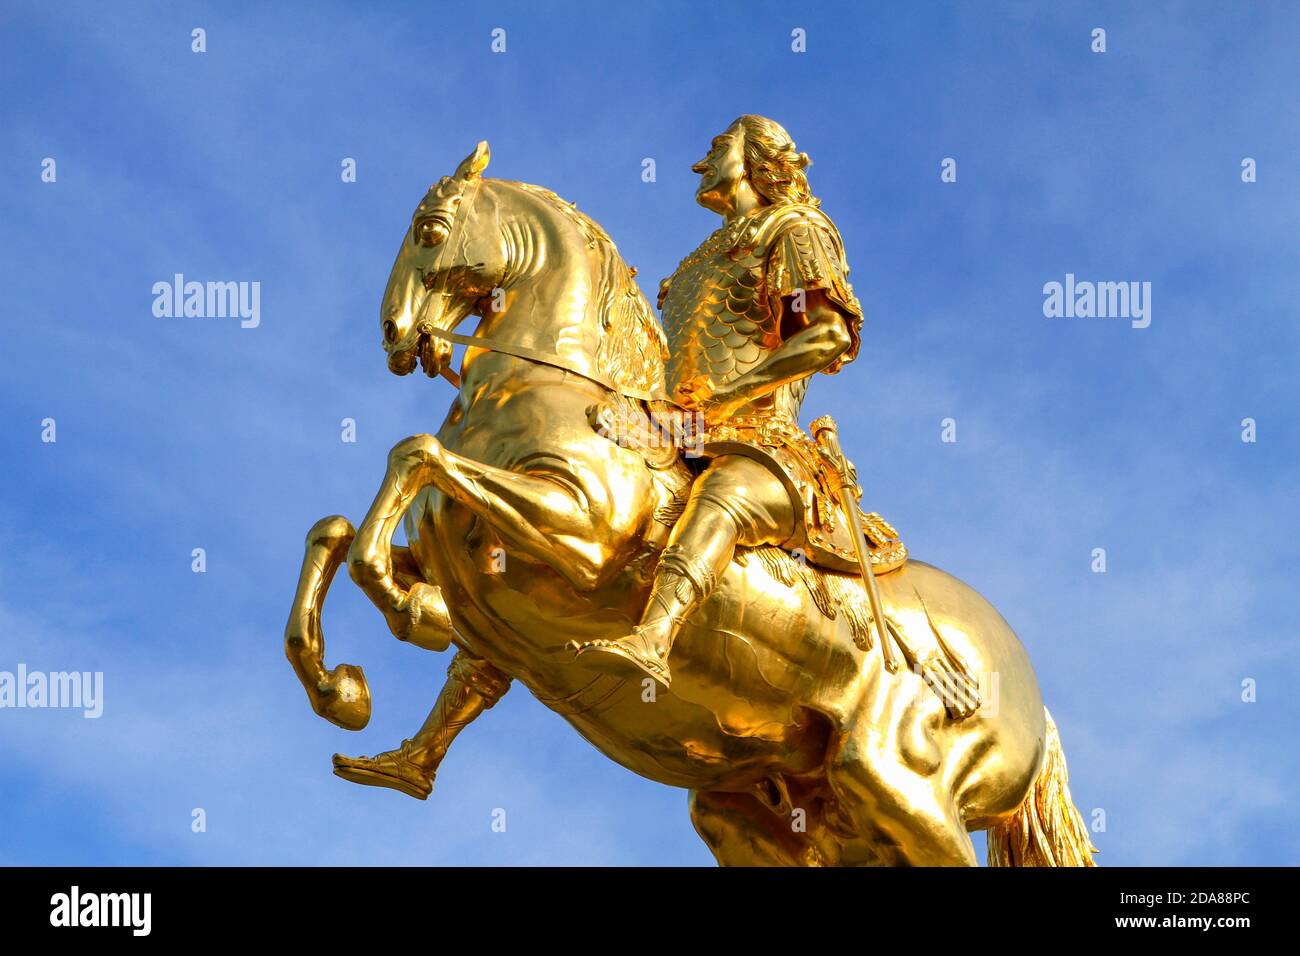 Goldener Reiter, Golden Cavalier, equestrian statue of August the Strong in Dresden, Saxony, Germany, Europe Stock Photo